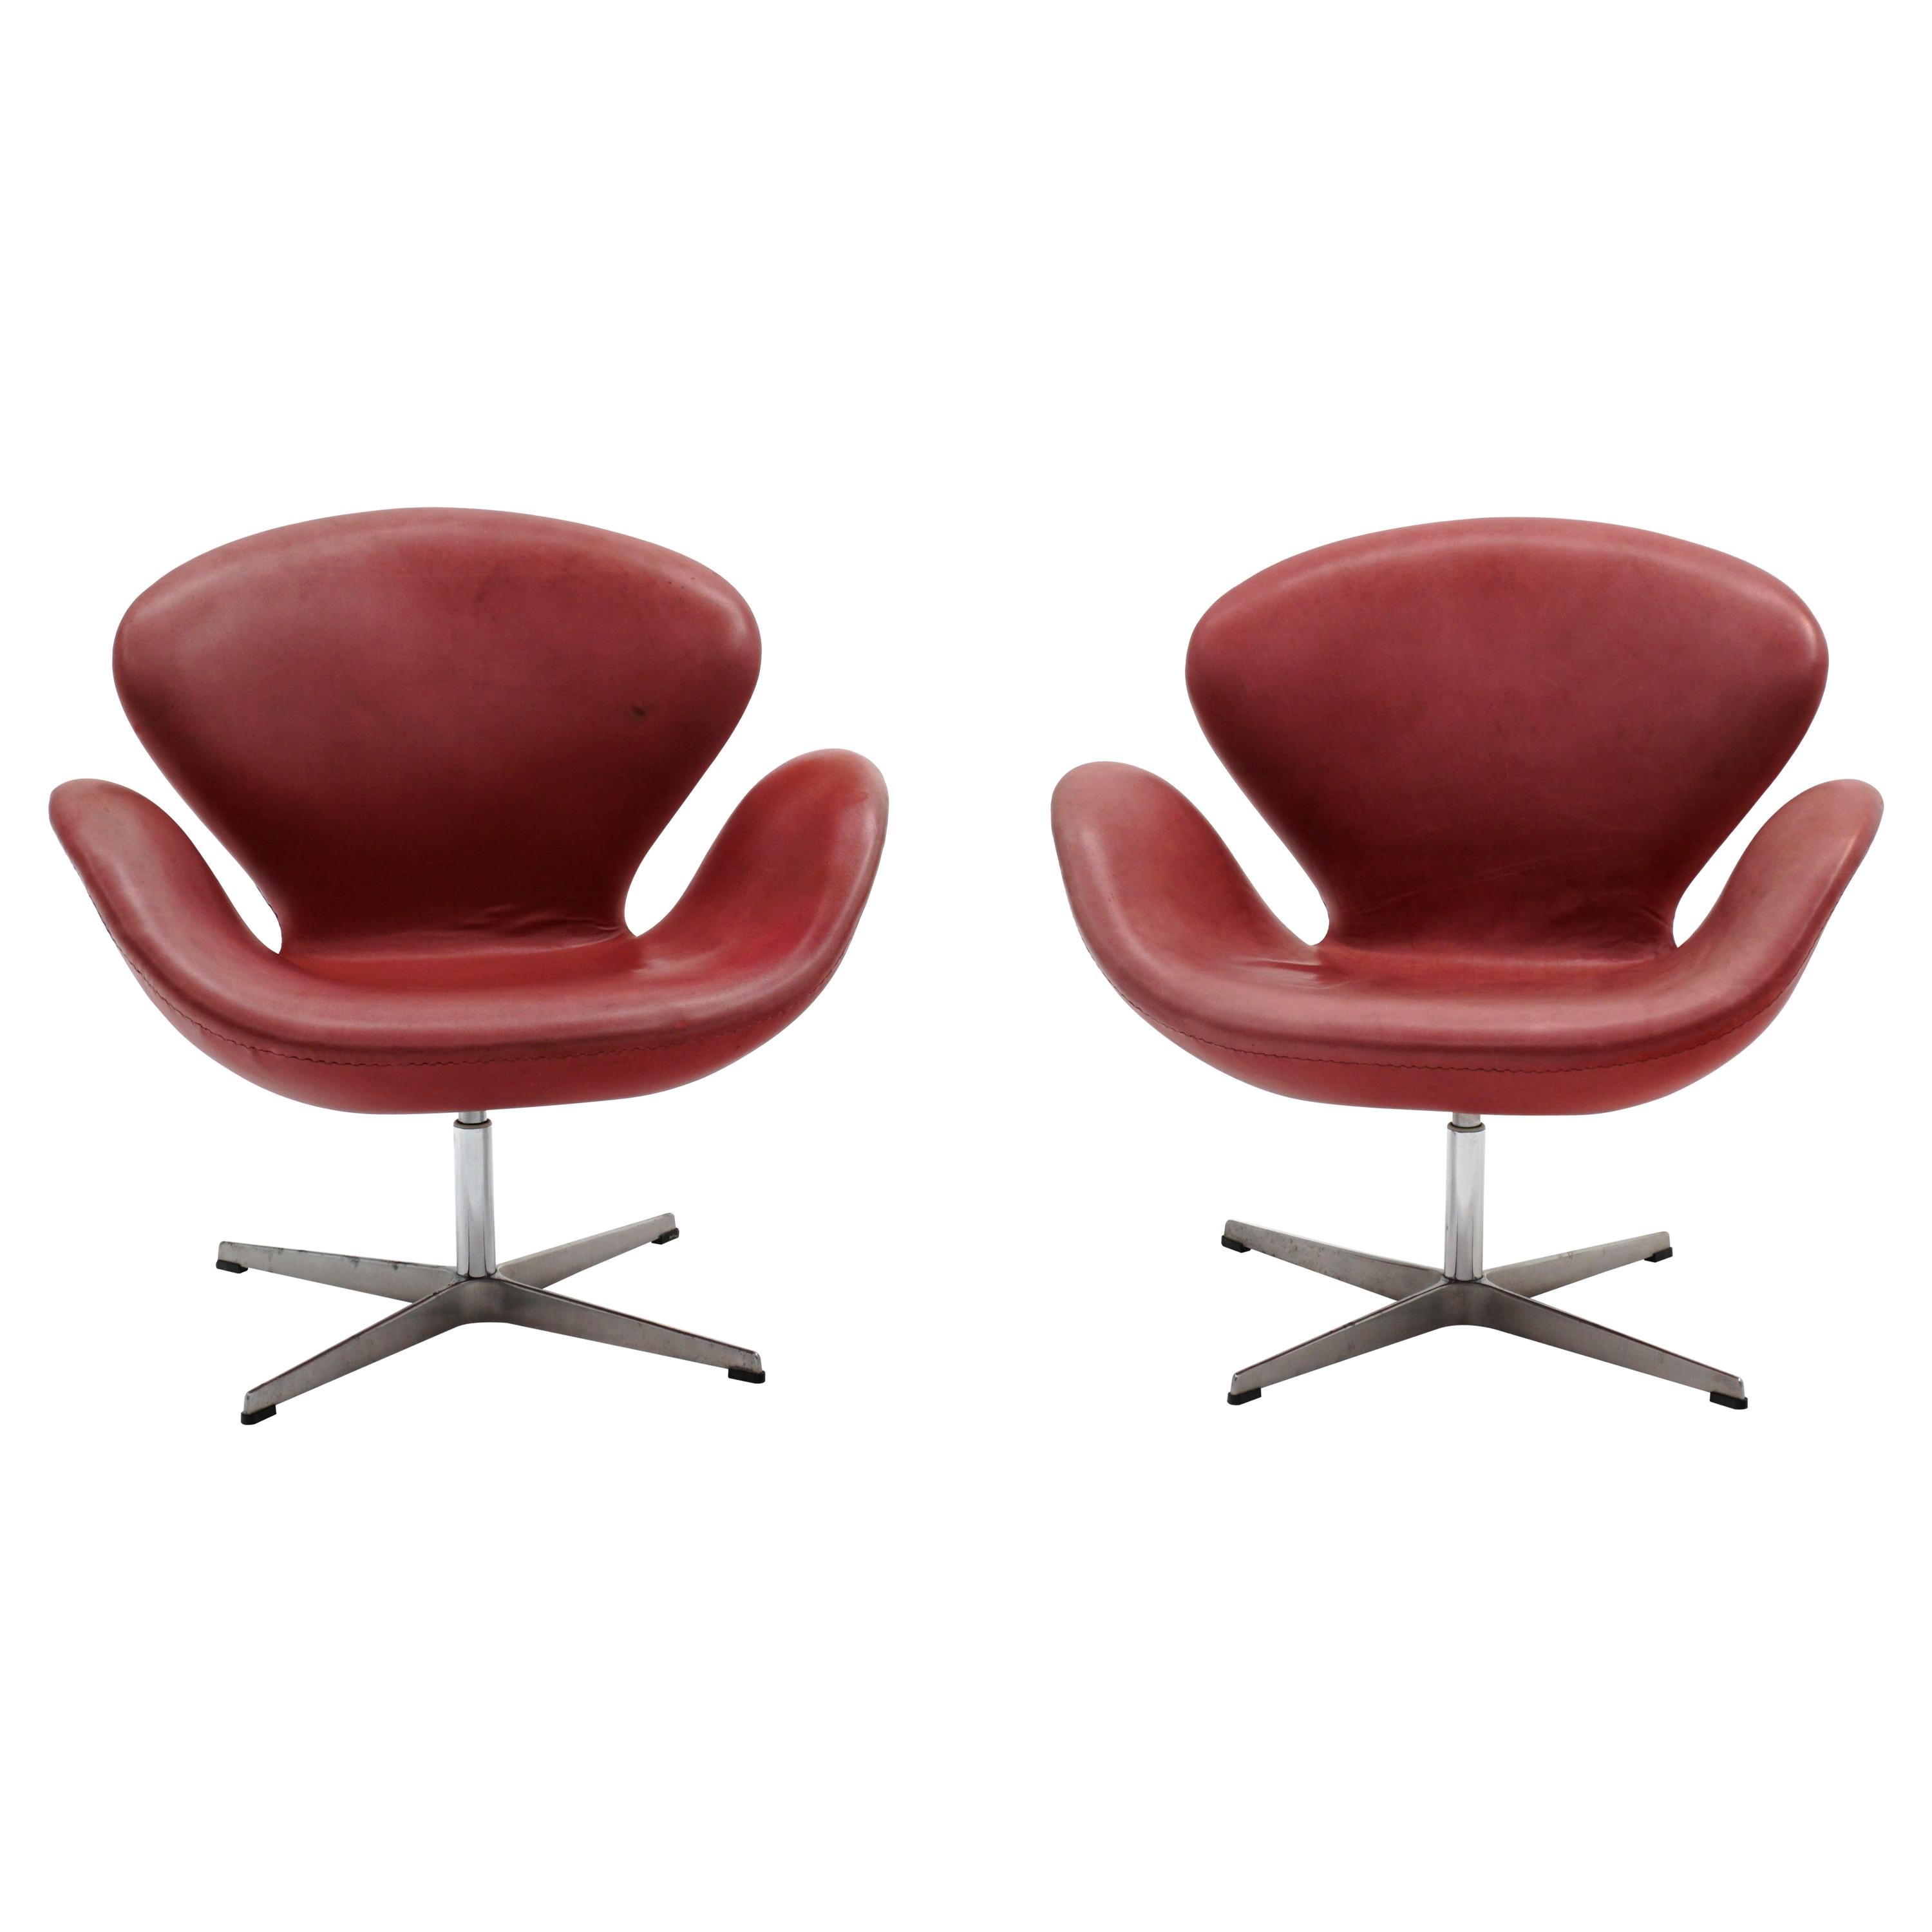 Pair of Faded Red Leather Swan Chairs by Arne Jacobsen for Fritz Hansen